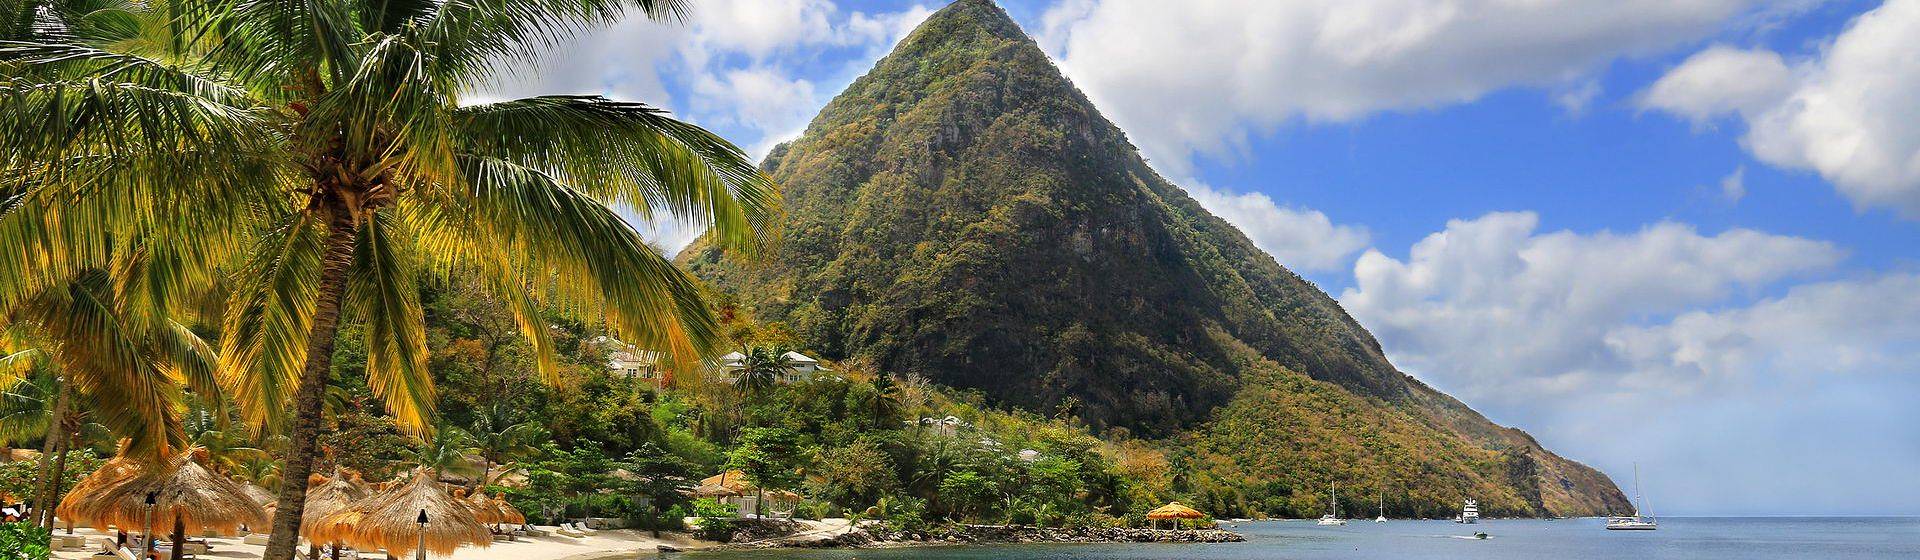 Holidays to St Lucia Image